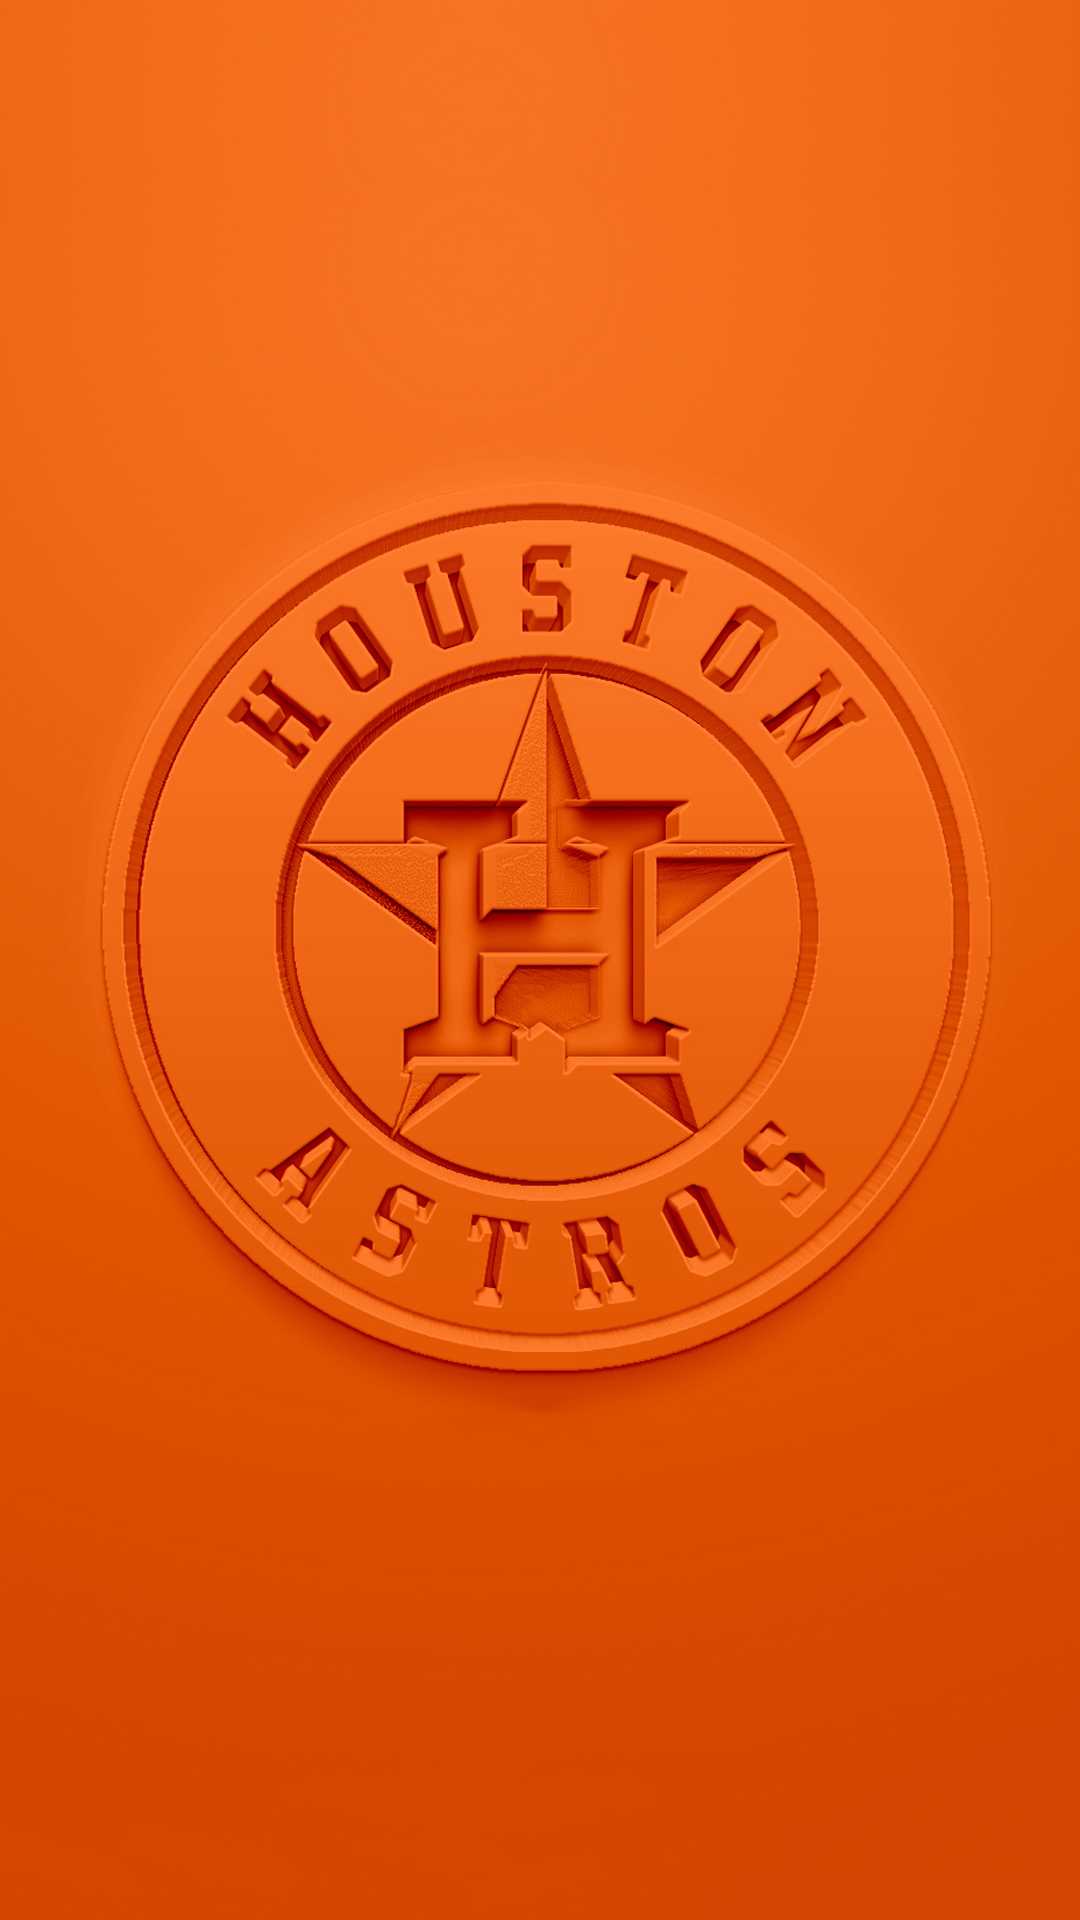 Astros Iphone Wallpapers